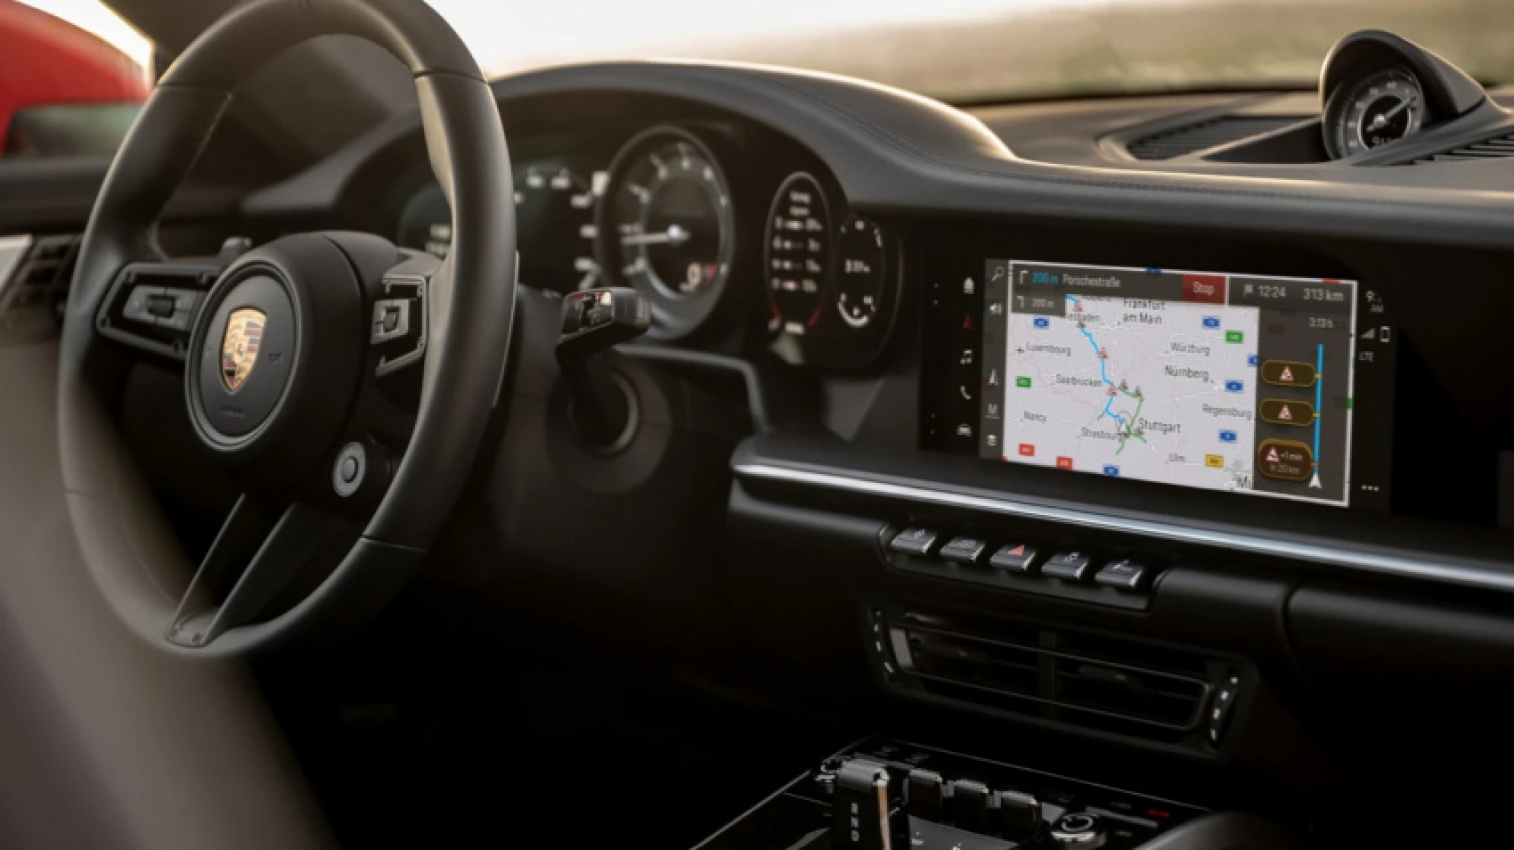 autos, car news, cars, news, porsche, android, android auto, apple carplay, car technology, android, updated porsche pcm 6 infotainment brings new features